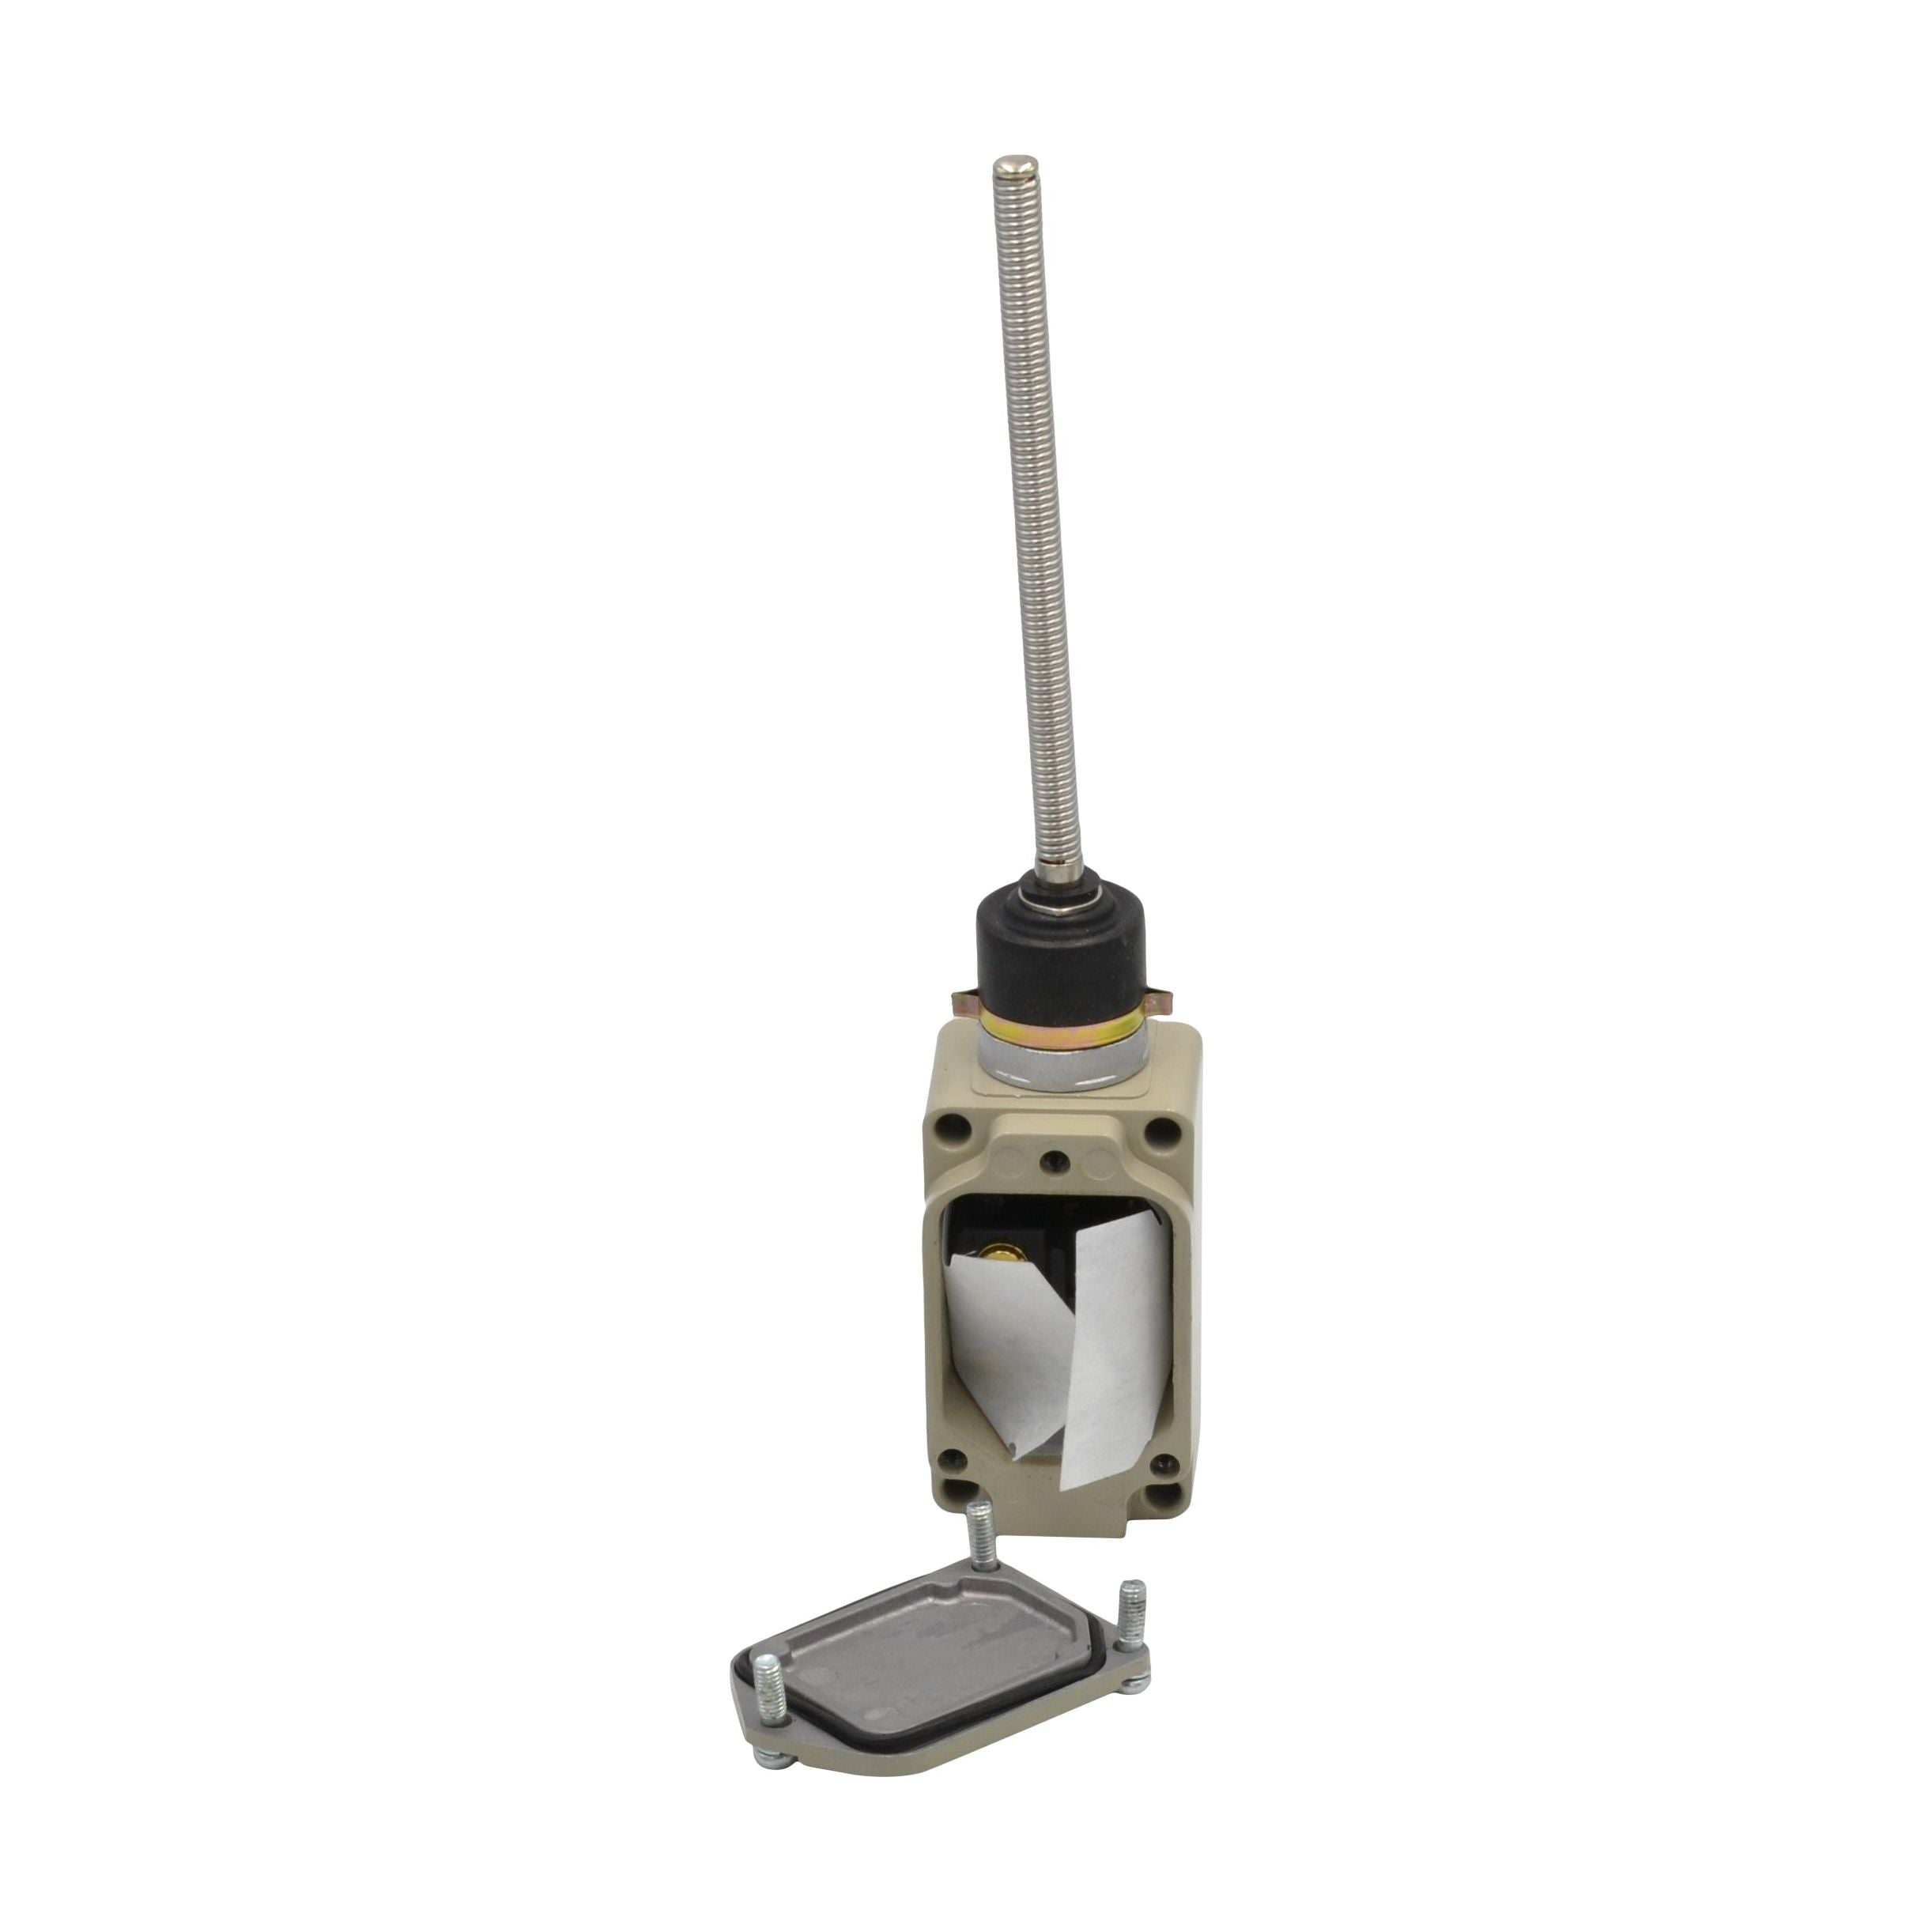 WLJN Stainless Steel Spring Limit Switch